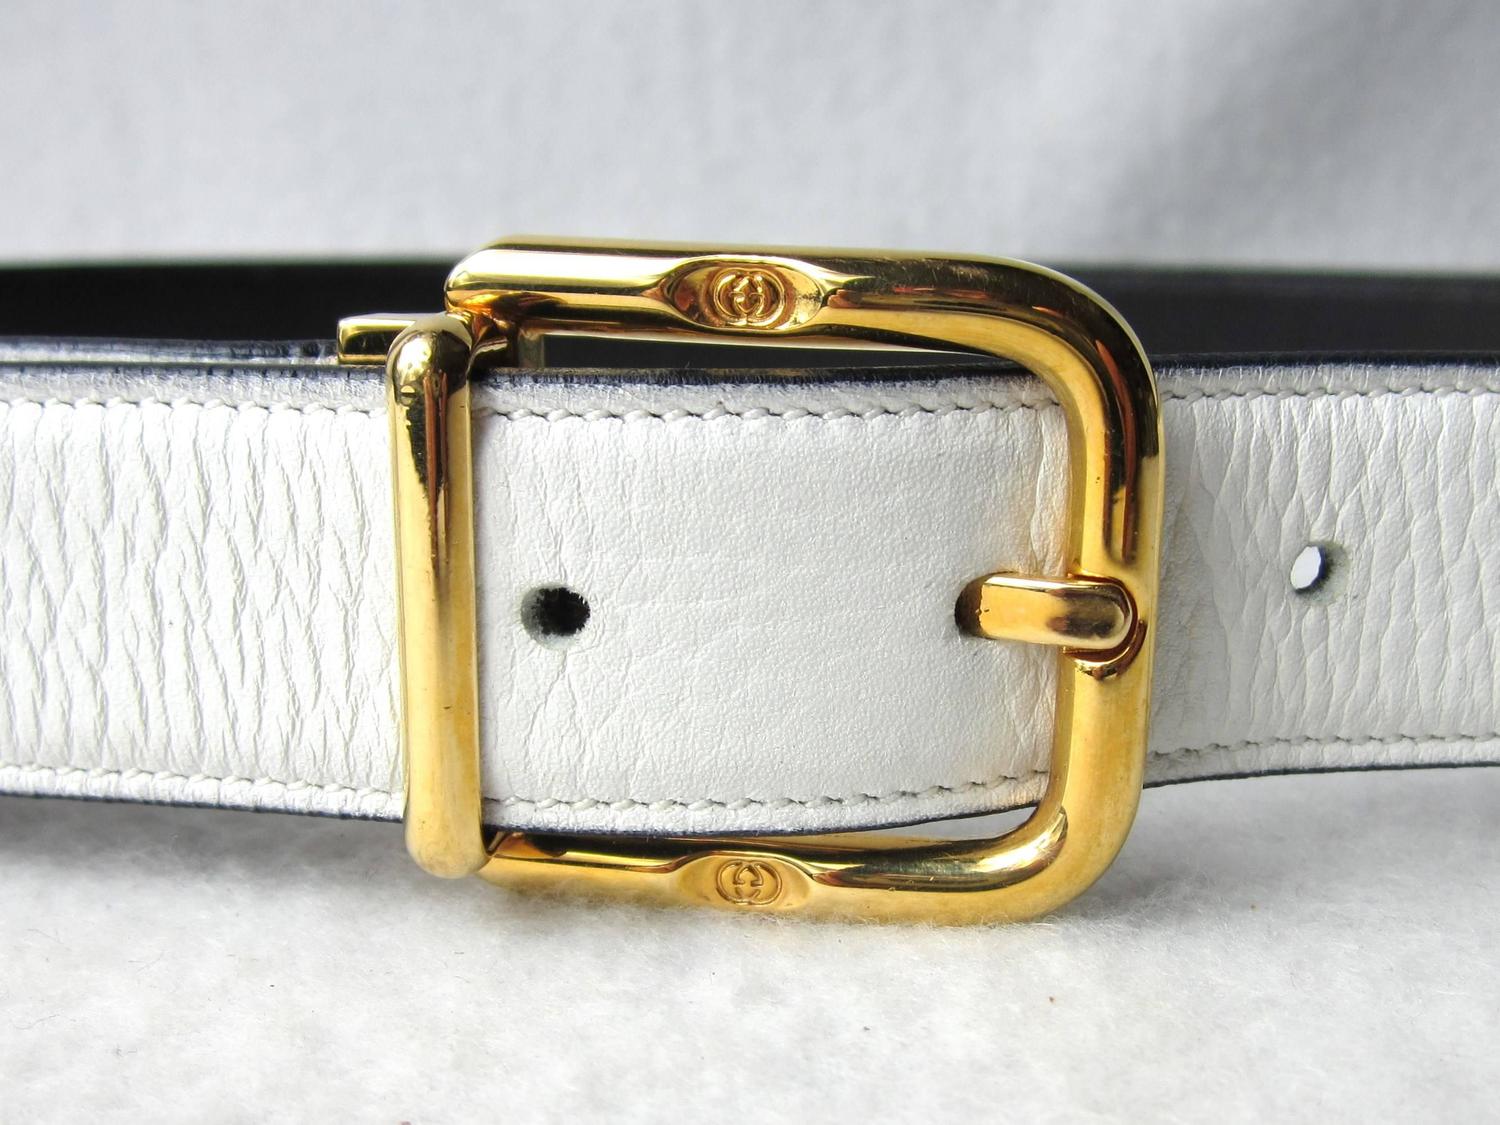 Gucci Belt White Leather Signature Buckle New Old Stock For Sale at 1stdibs